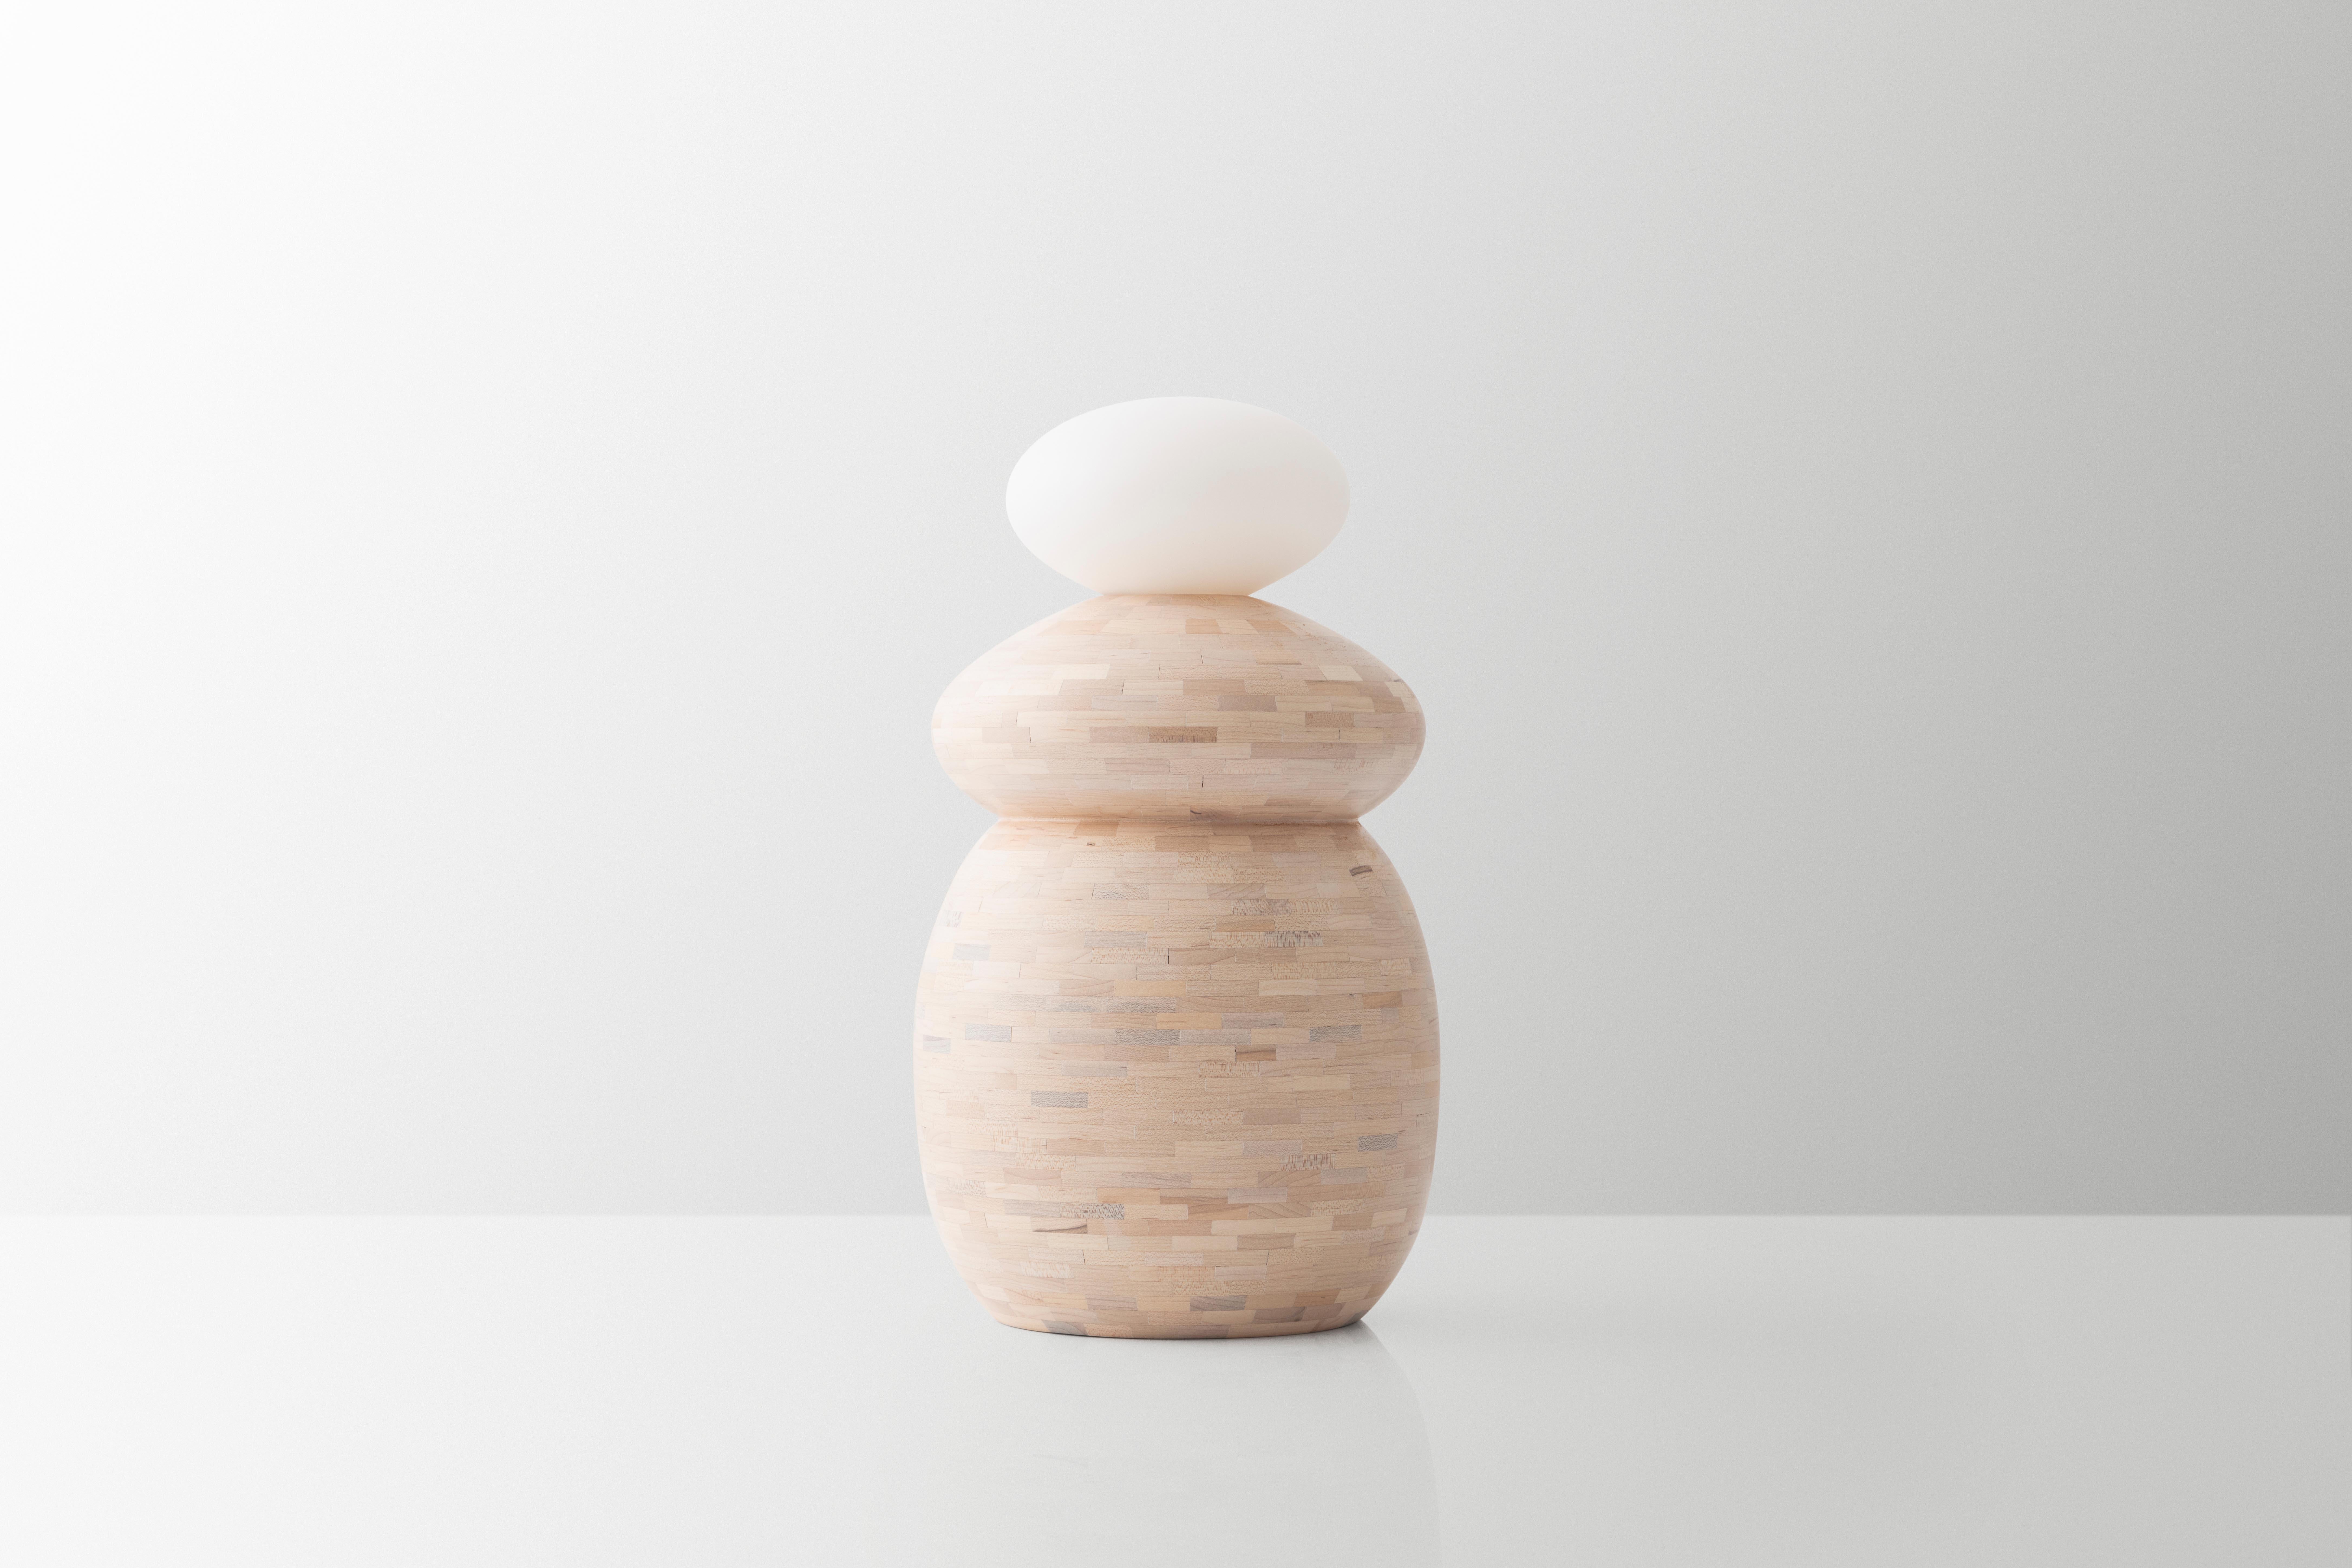 Designed by Stefanie Haining and Created by Richard Haining, this STACKED Cairn Lamp is Richard's most recent explorations into his signature lighting. As with all of his work, this sculpture was built, sculpted, and finished entirely by hand. To